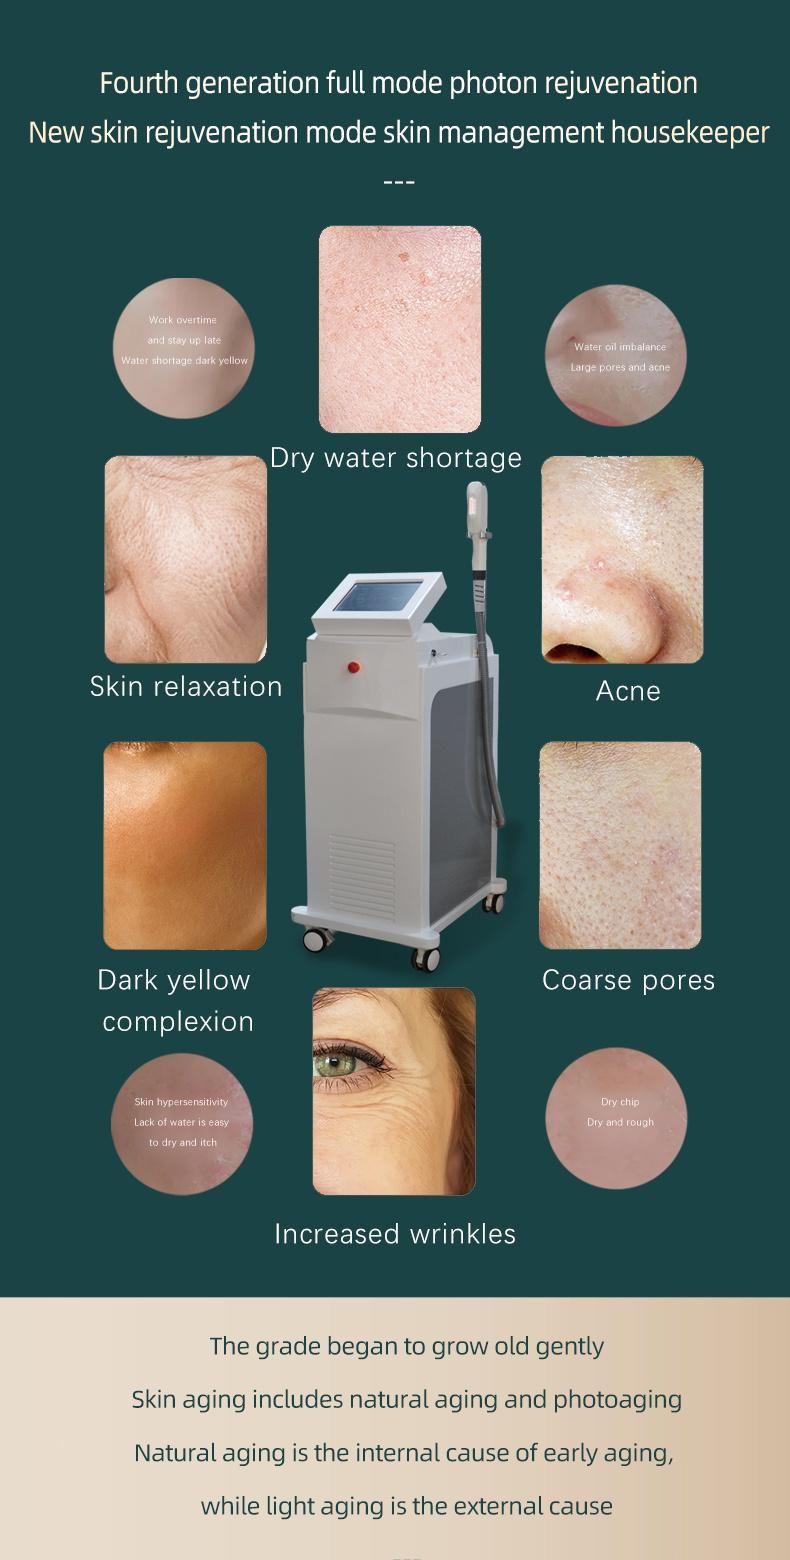 Opt Photon Rejuvenator Shr Painless Ice Point Hair Removal Whitening and Freckle Removing Laser Eyebrow Washing Tattoo